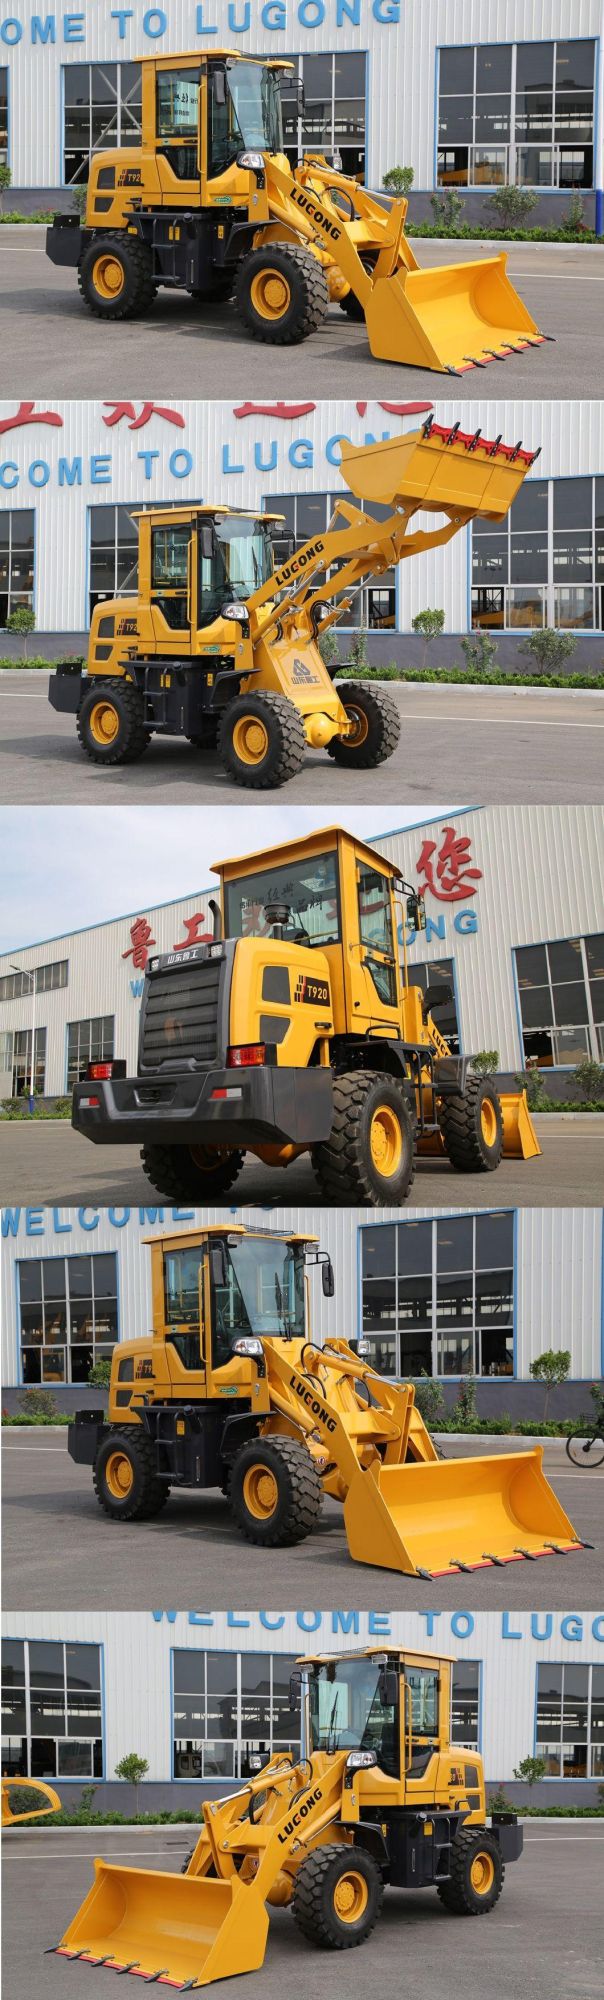 Lugong 1.5 Ton Front End Small Wheel Loader with Hydraulic System